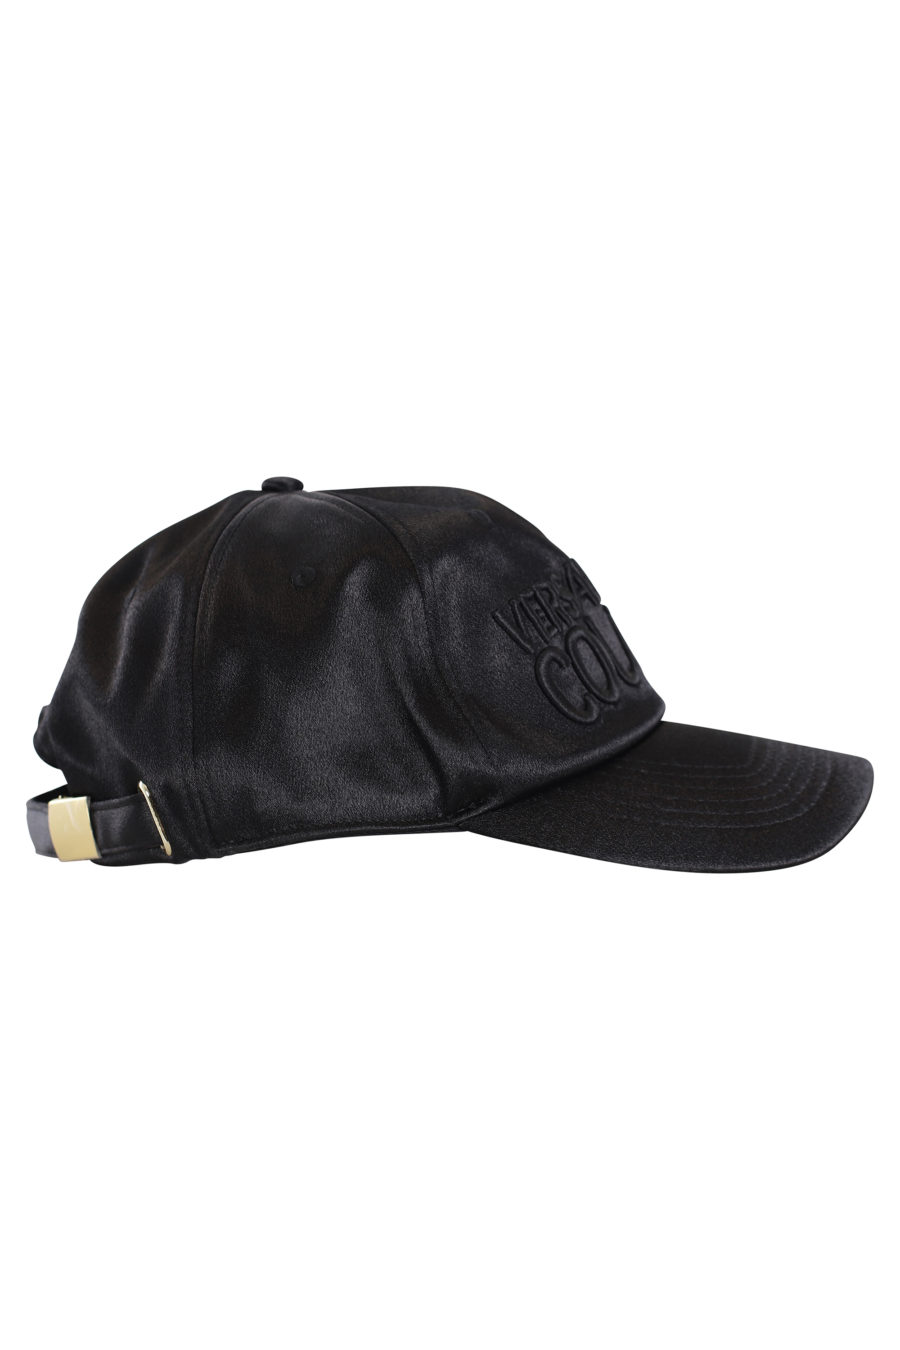 Black satin cap with black embroidered logo - IMG 0156